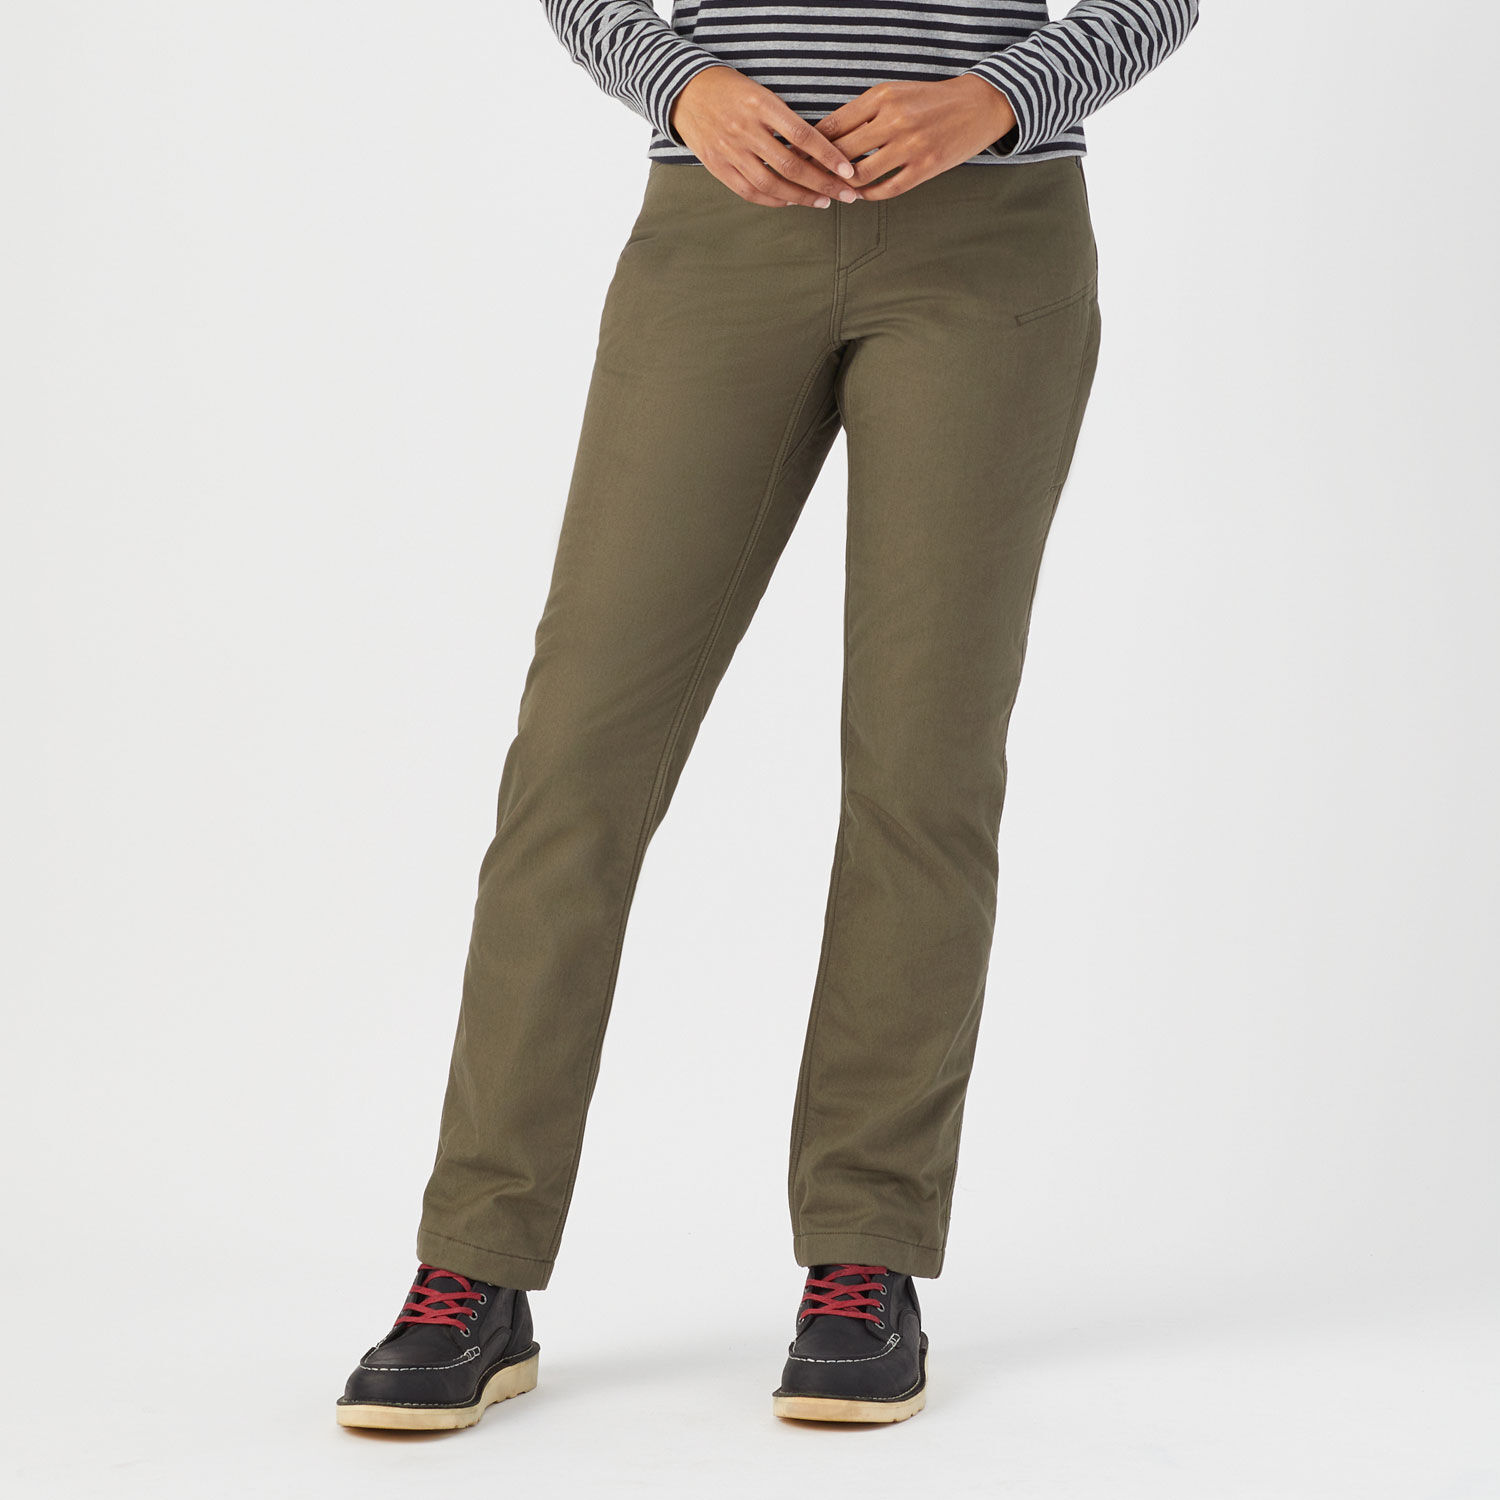 Buy Kica Inner Fleece Warm Lined Pants With Drawstring Online